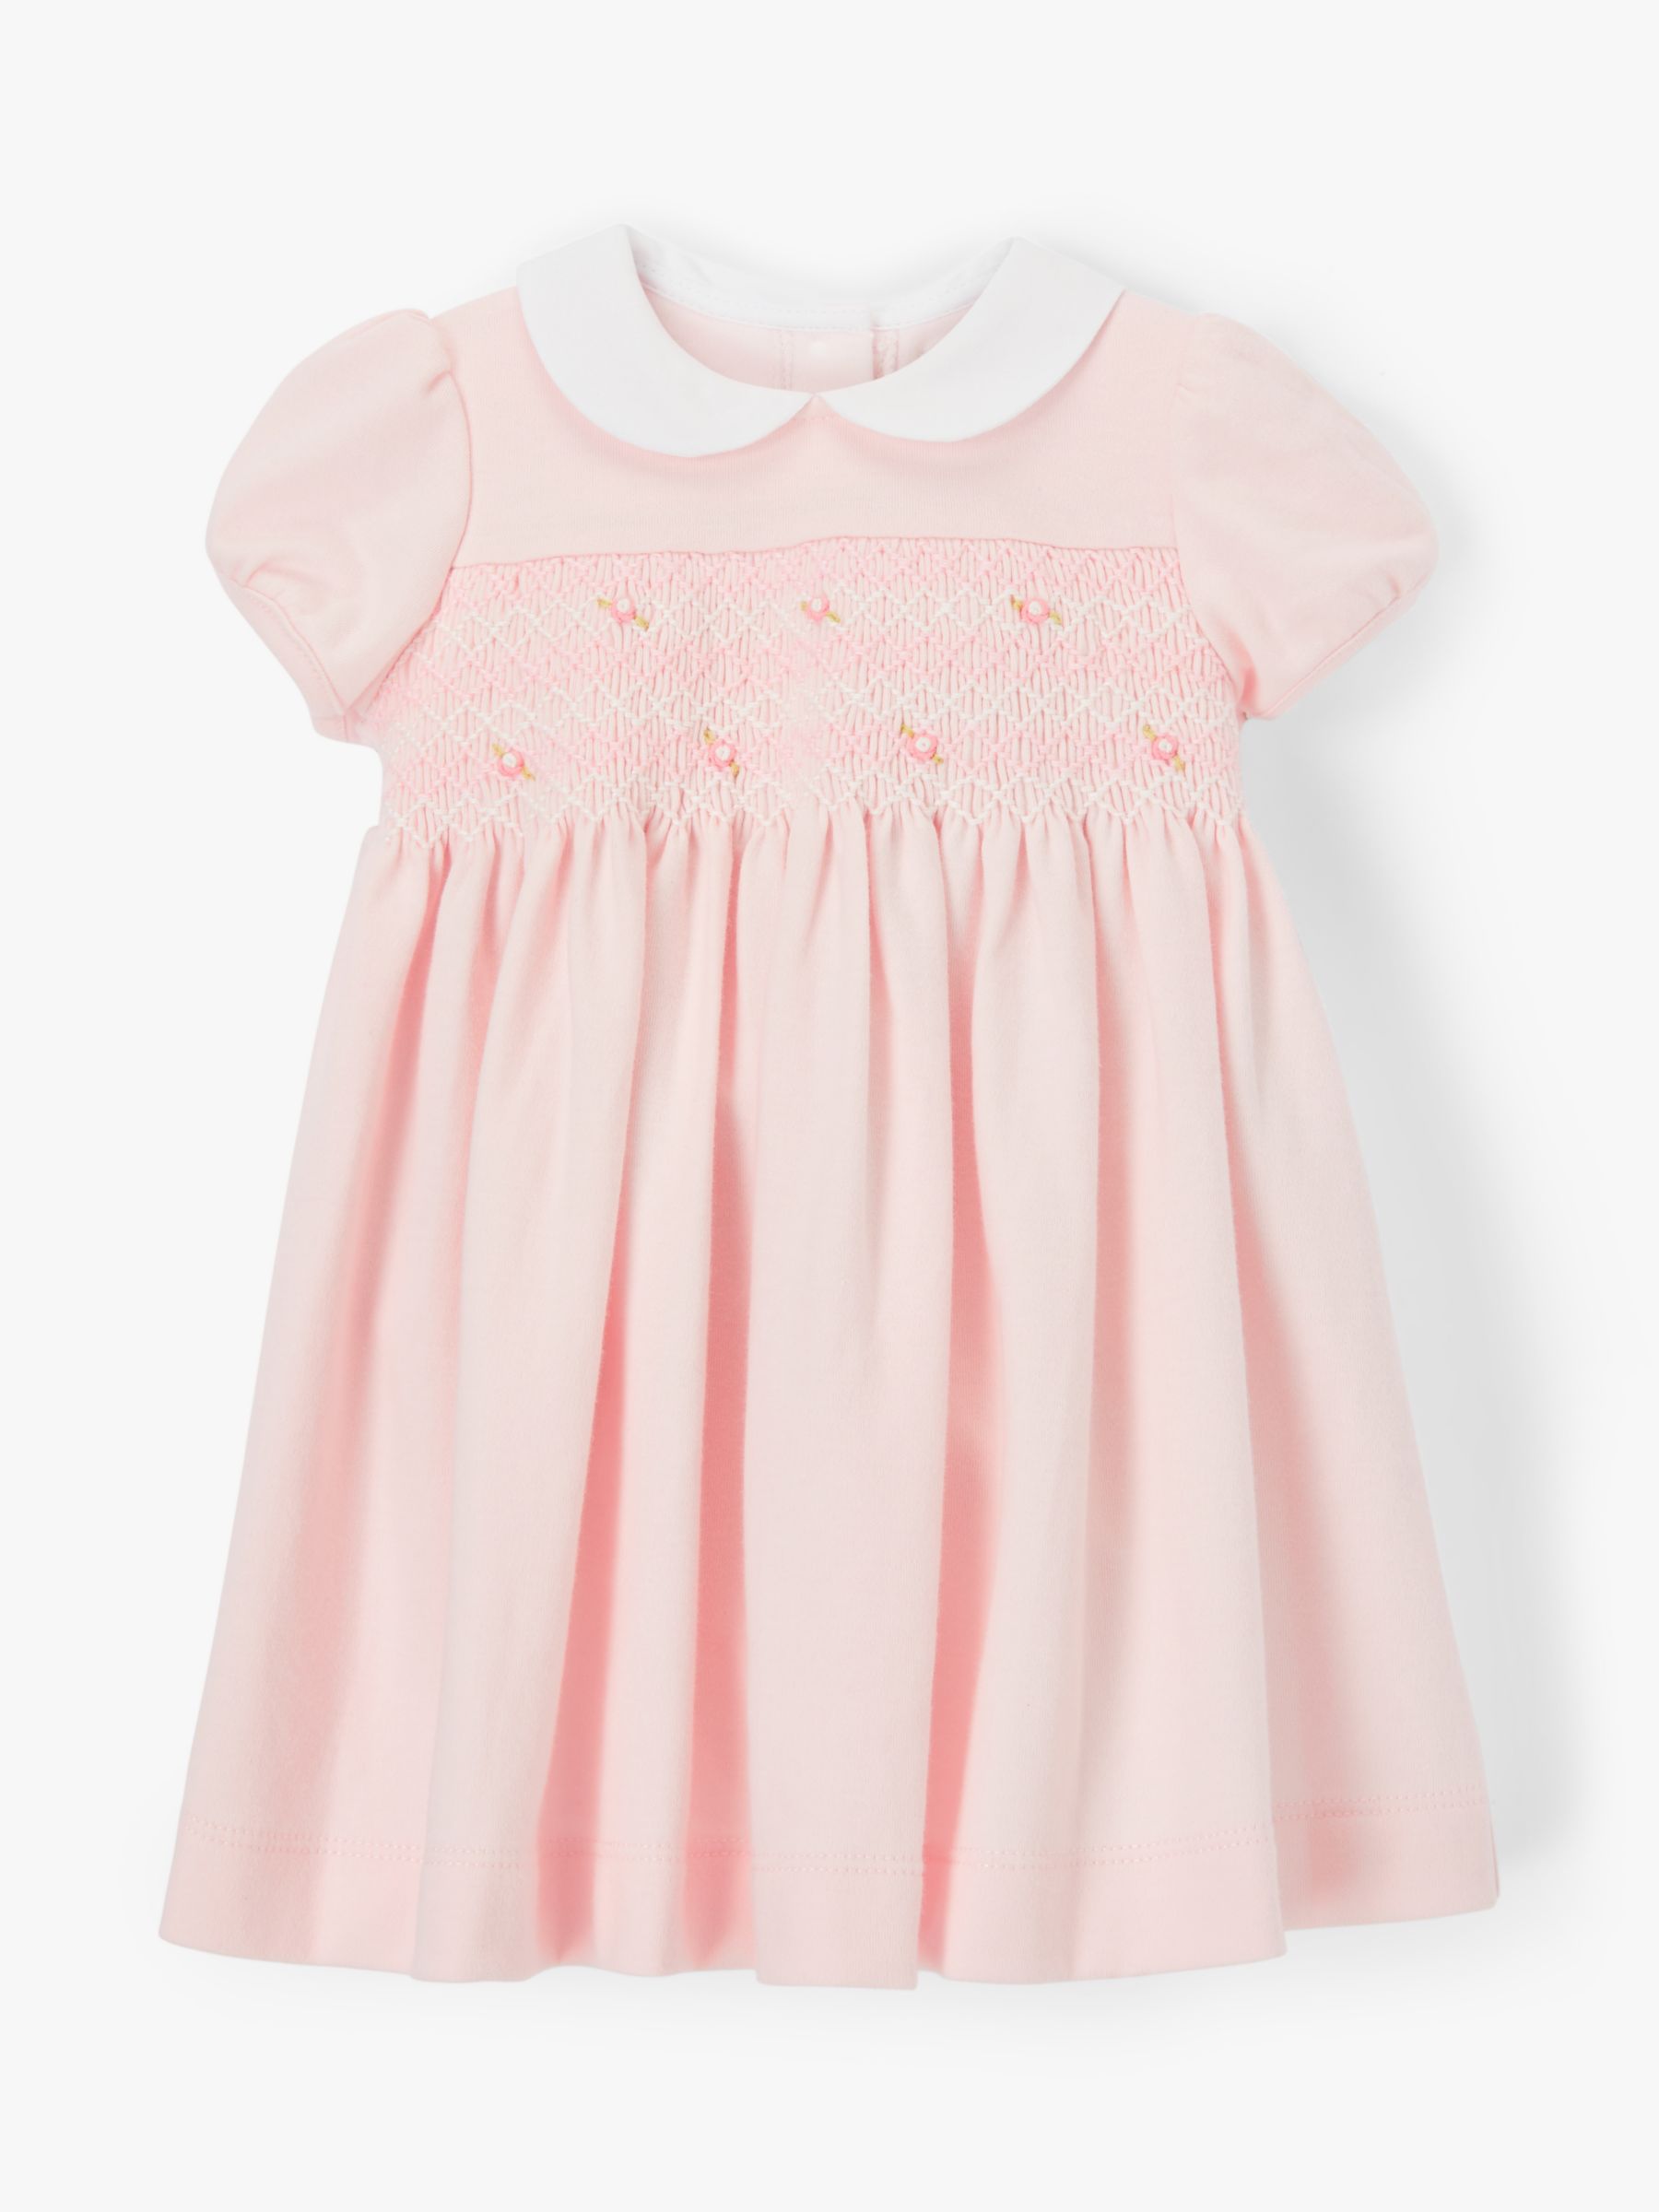 John Lewis Heirloom Collection Baby Smock Dress, Pink, 0-3 months